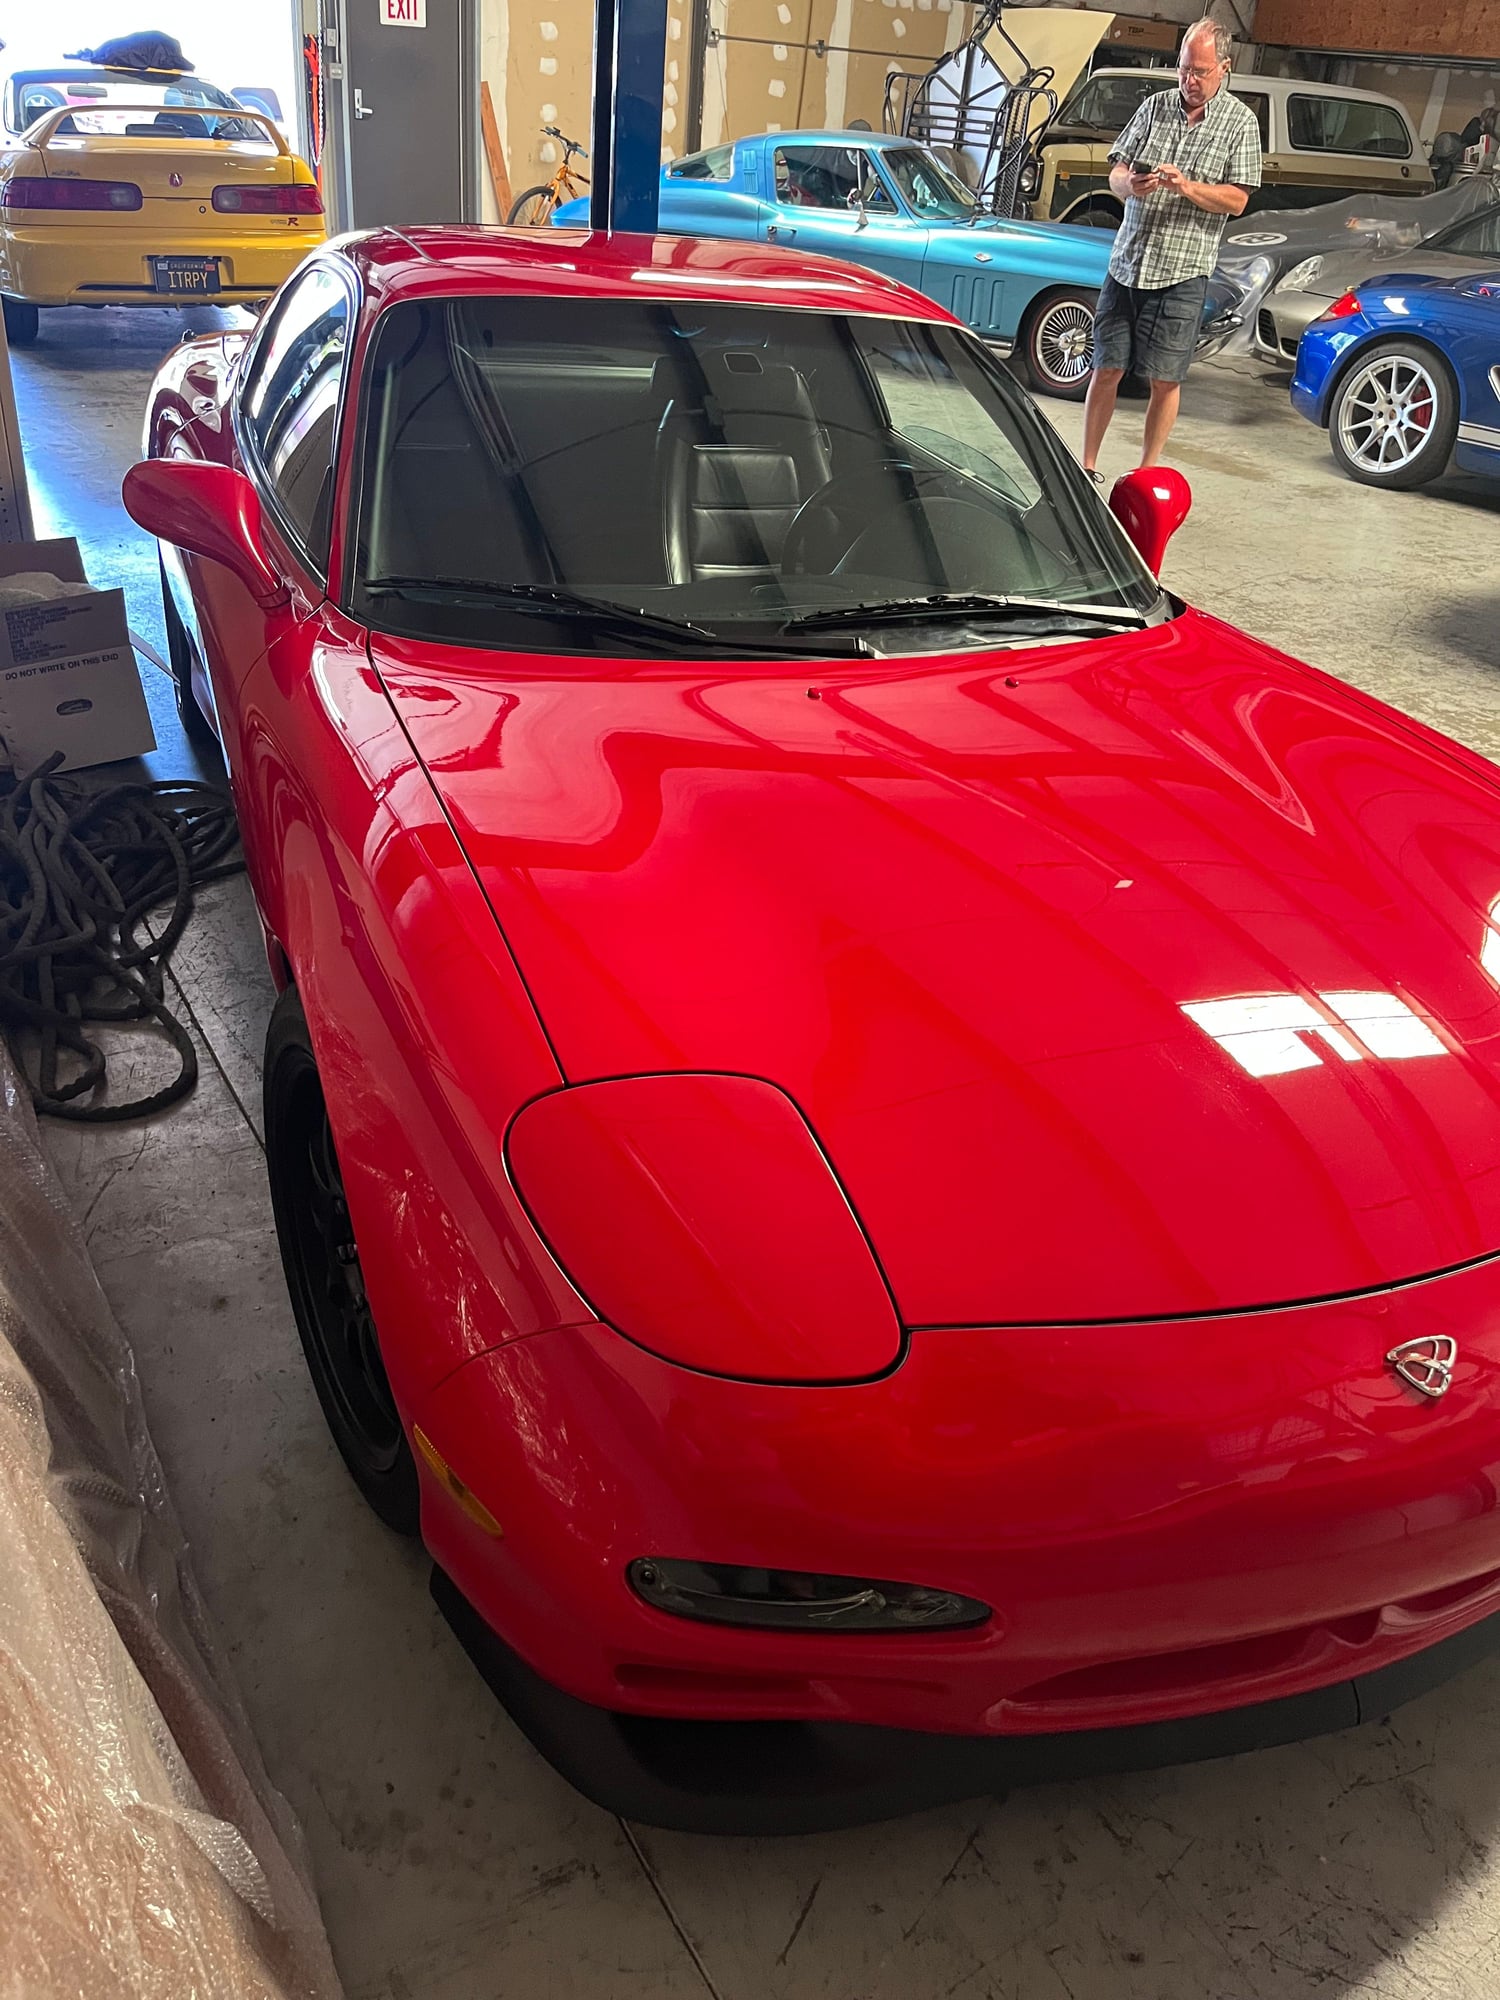 1994 Mazda RX-7 - 1994 Mazda RX-7 - Used - VIN JM1FD3338R0303241 - 77,000 Miles - 2WD - Manual - Red - Mill Valley, CA 94941, United States